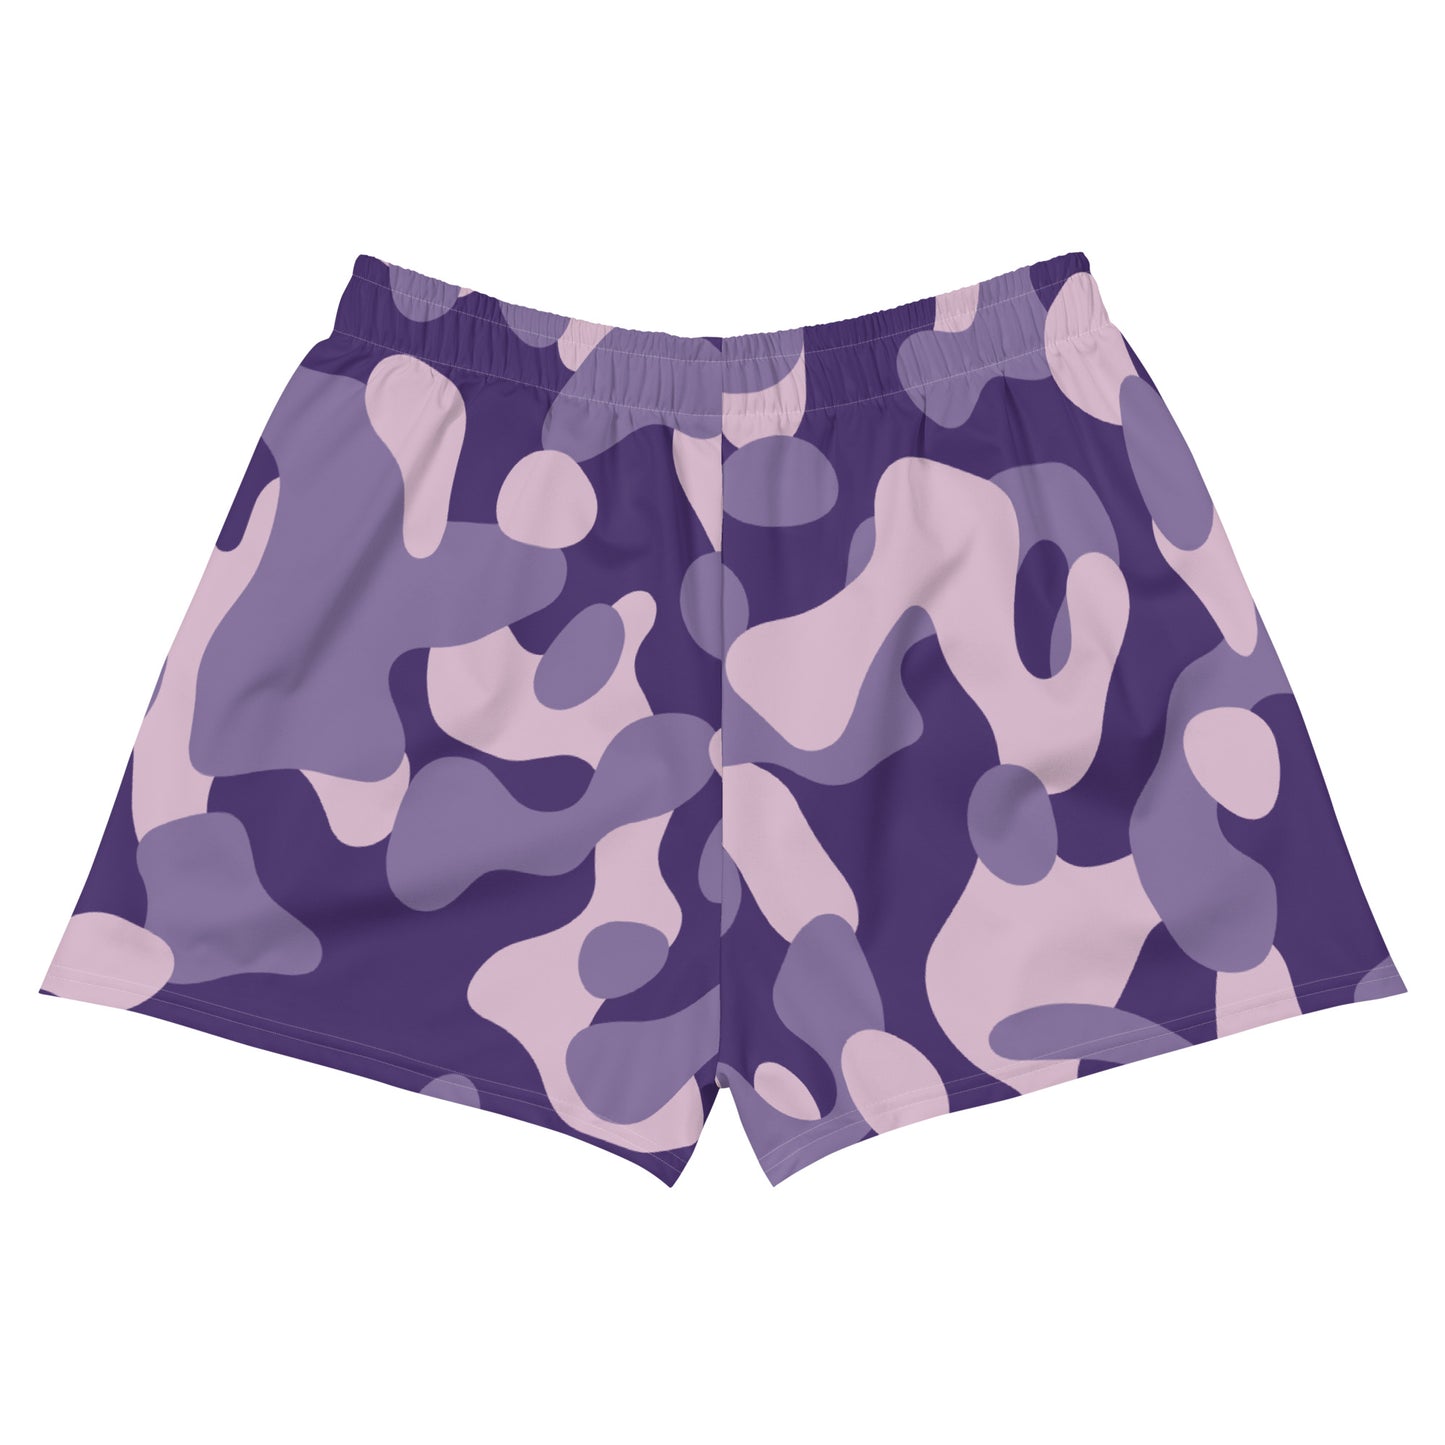 "Purple Camo Collection" WMNS athletic shorts